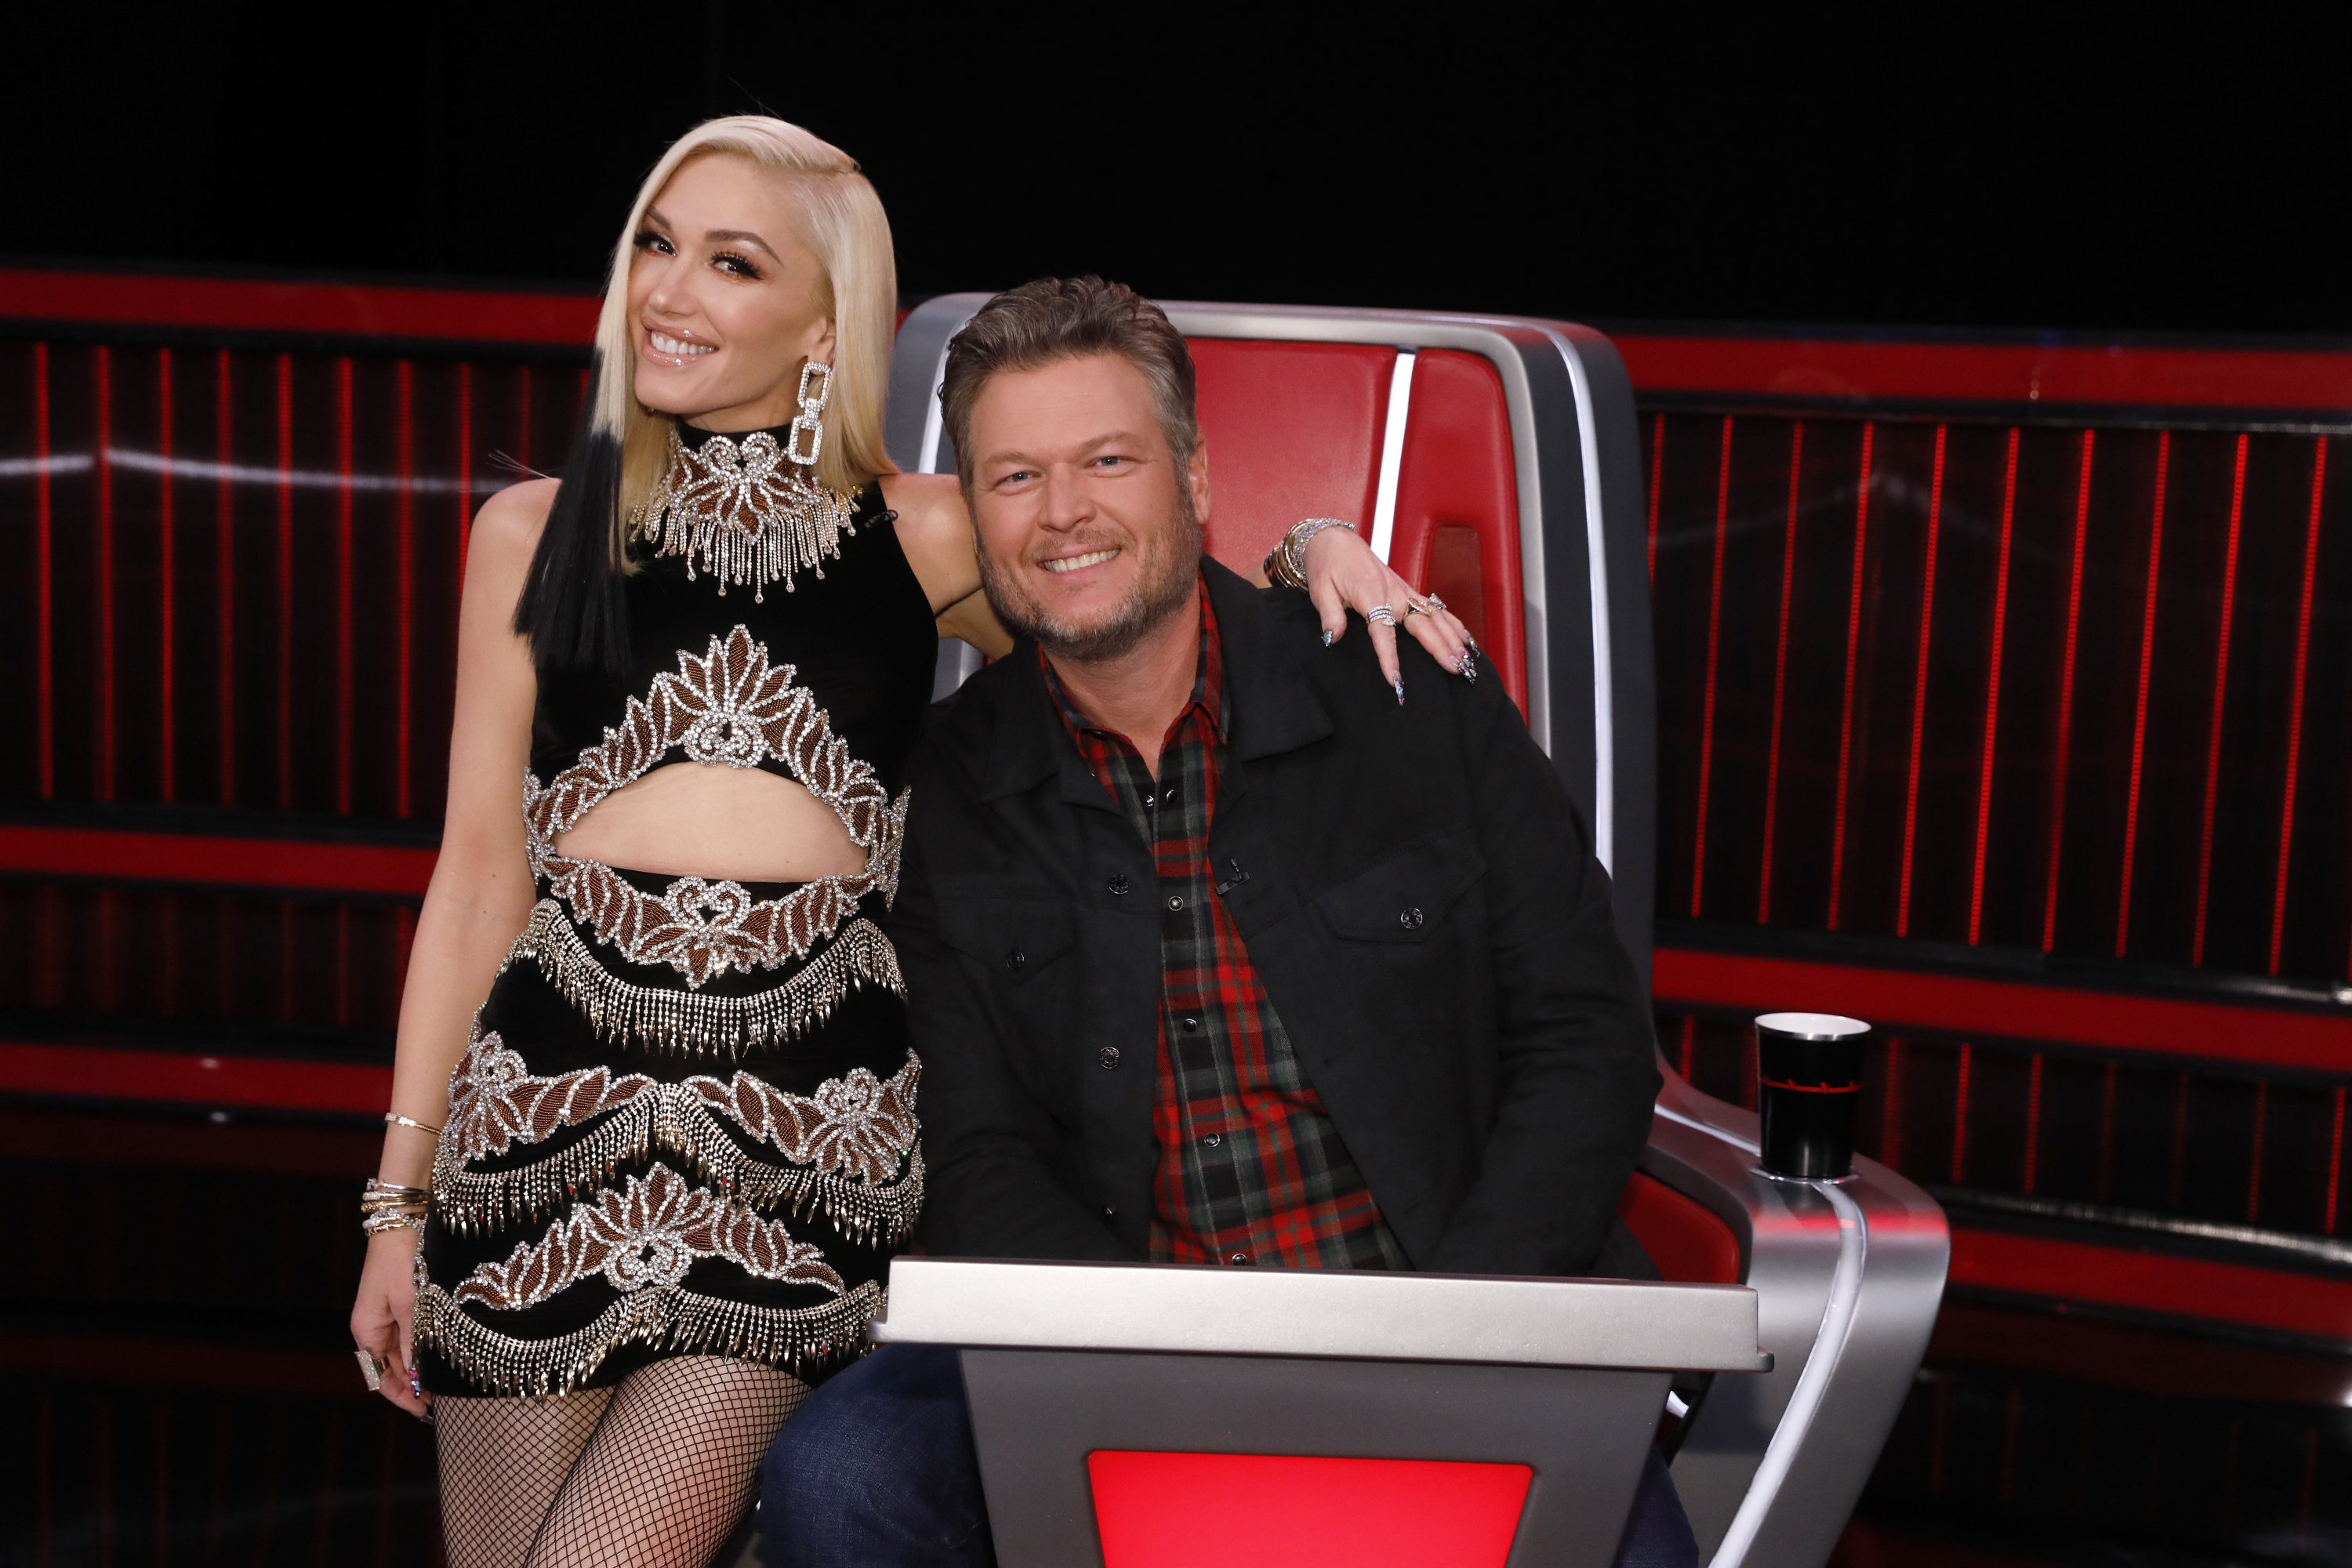 Gwen and Blake met in 2014 while coaches on NBC's The Voice